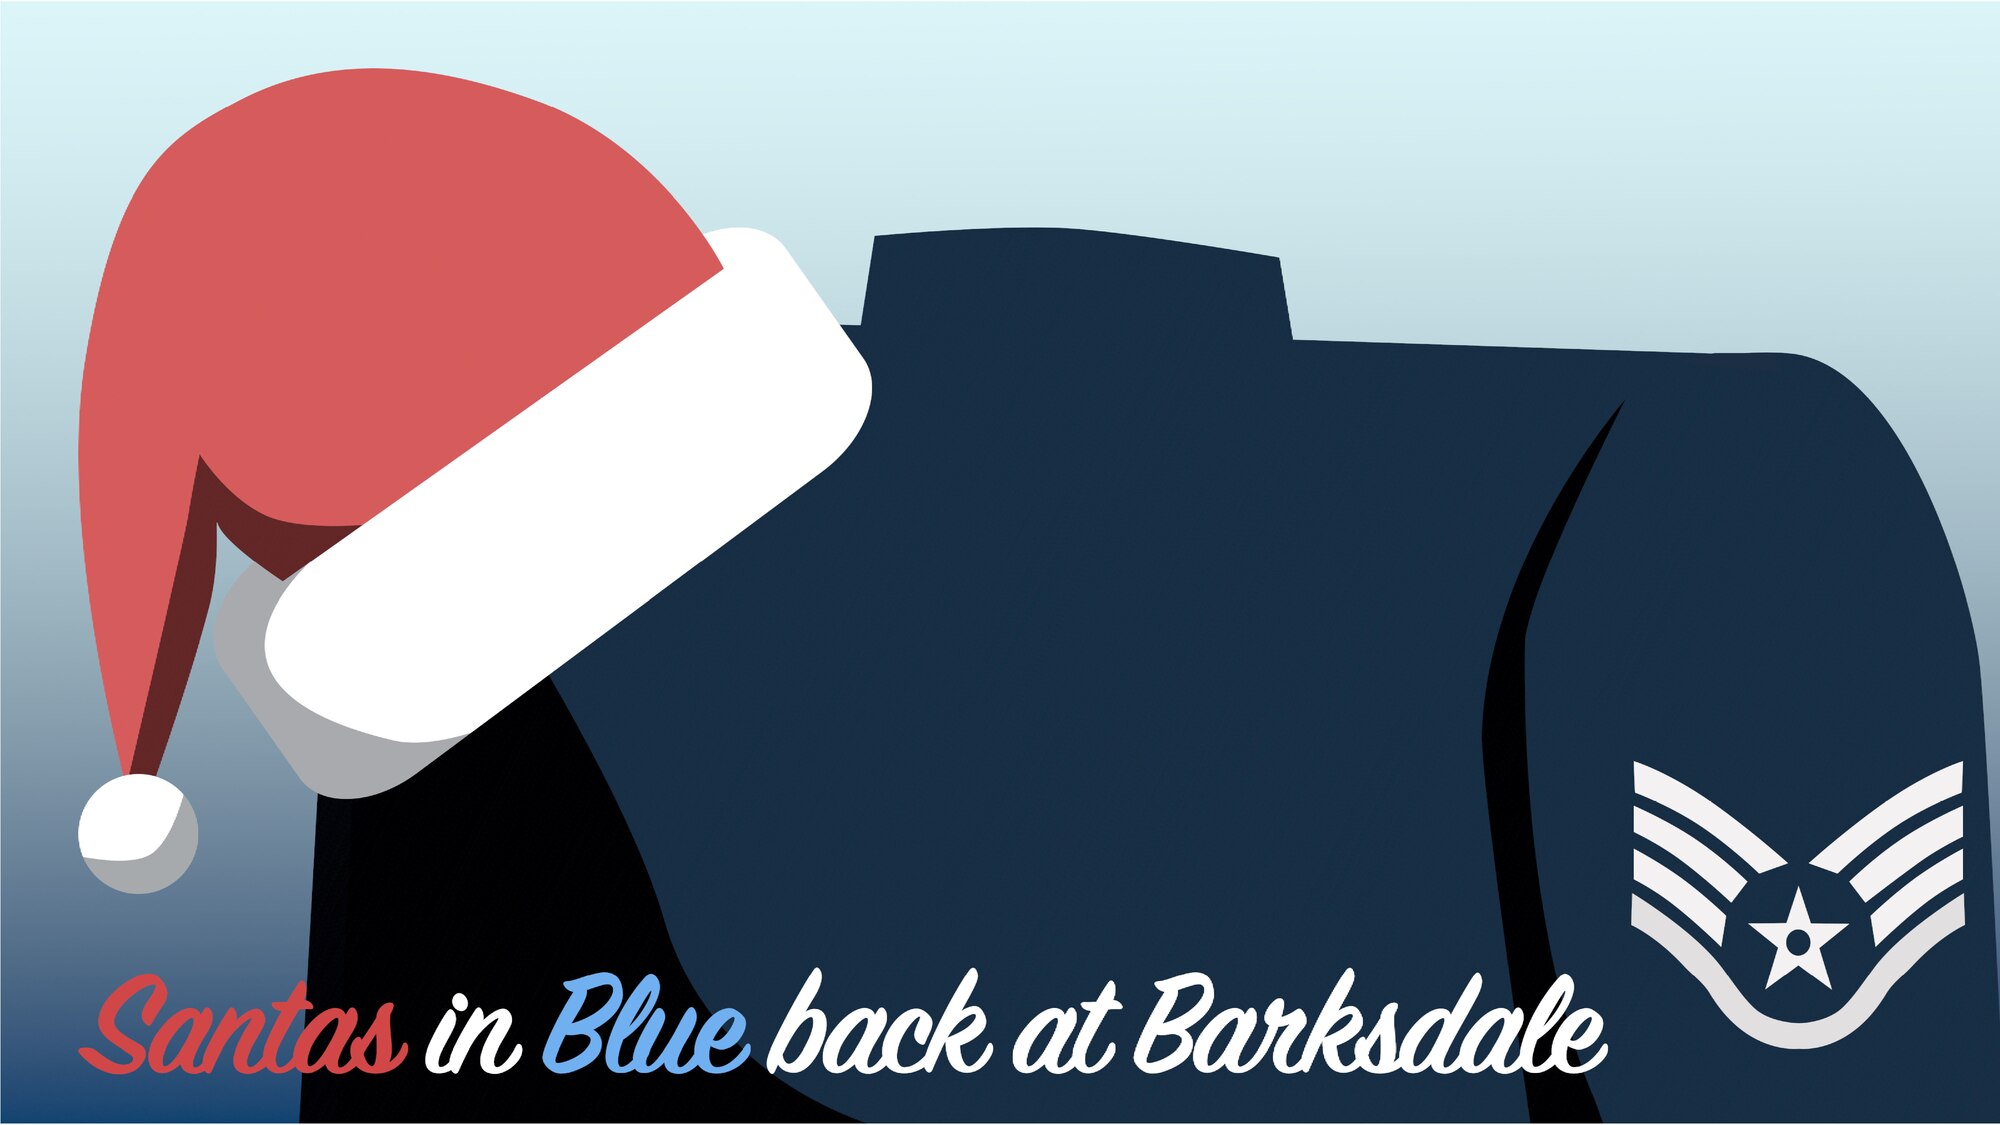 This graphic was created to inform the Barksdale community about Santas in Blue returning to Barksdale.